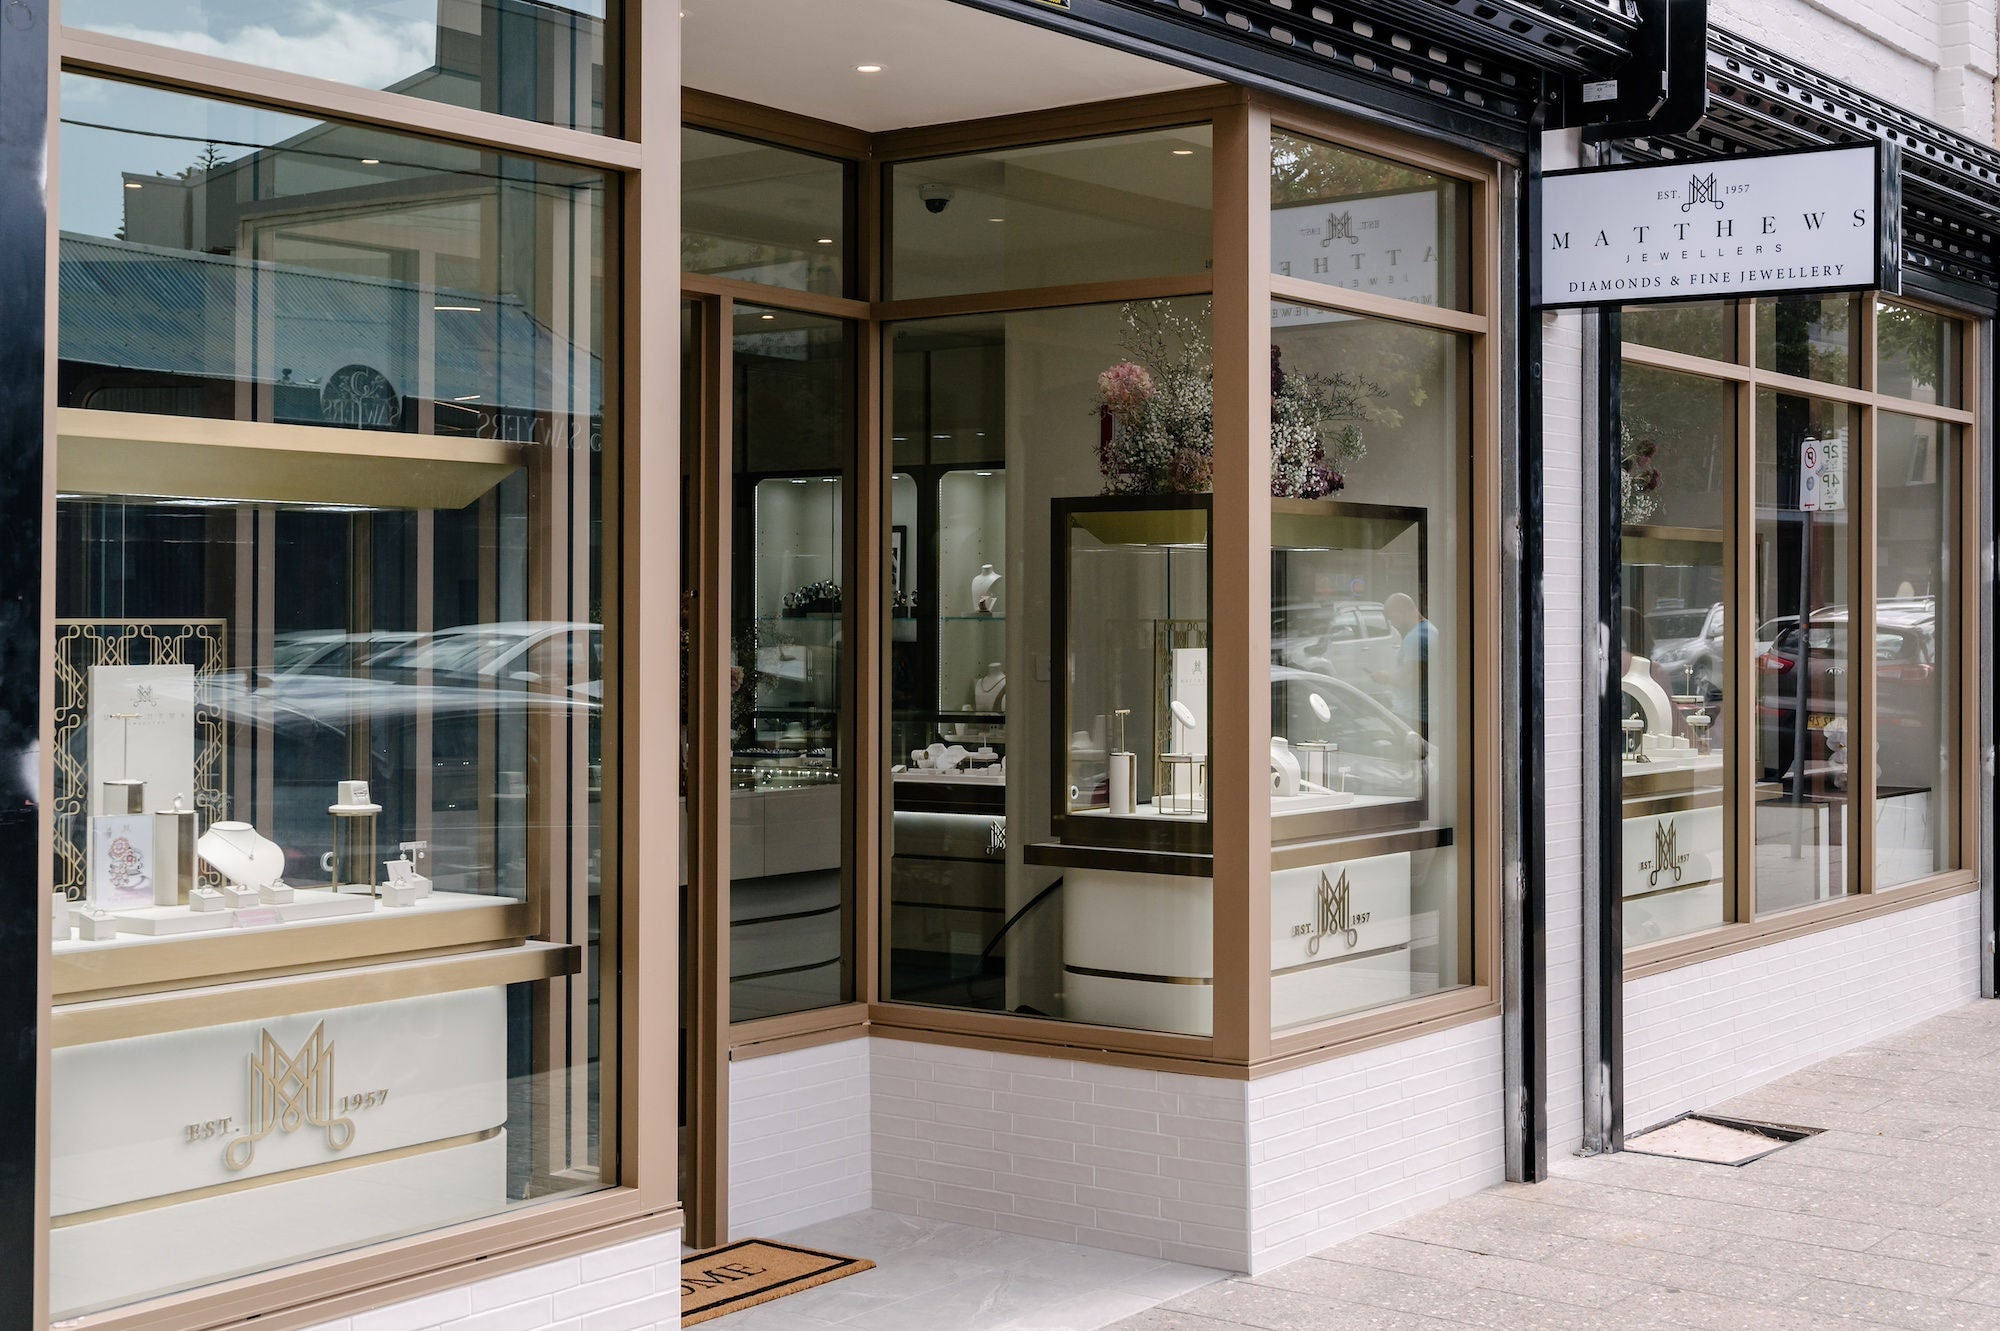 A Bright New Discovery in Newcastle - Matthews Jewellers now on Darby Street